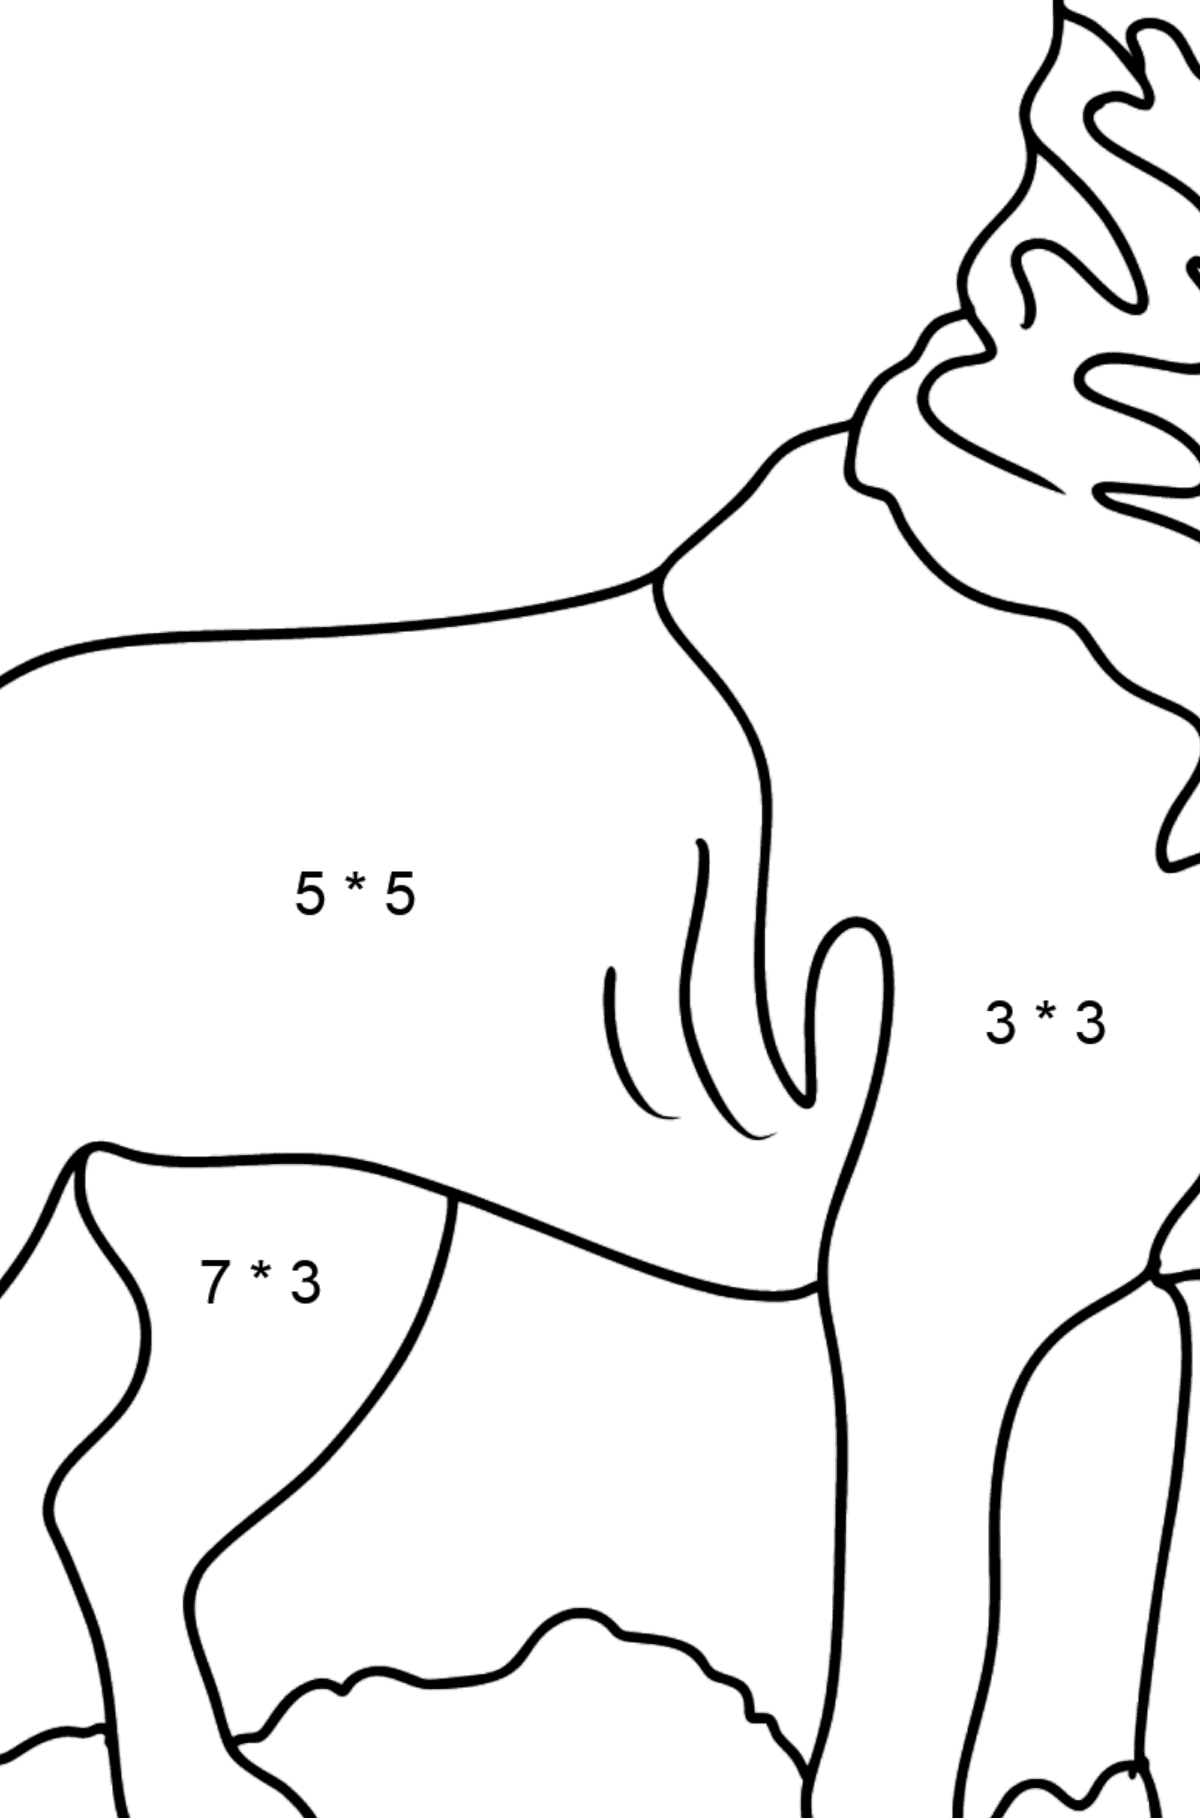 Rottweiler coloring page - Math Coloring - Multiplication for Kids